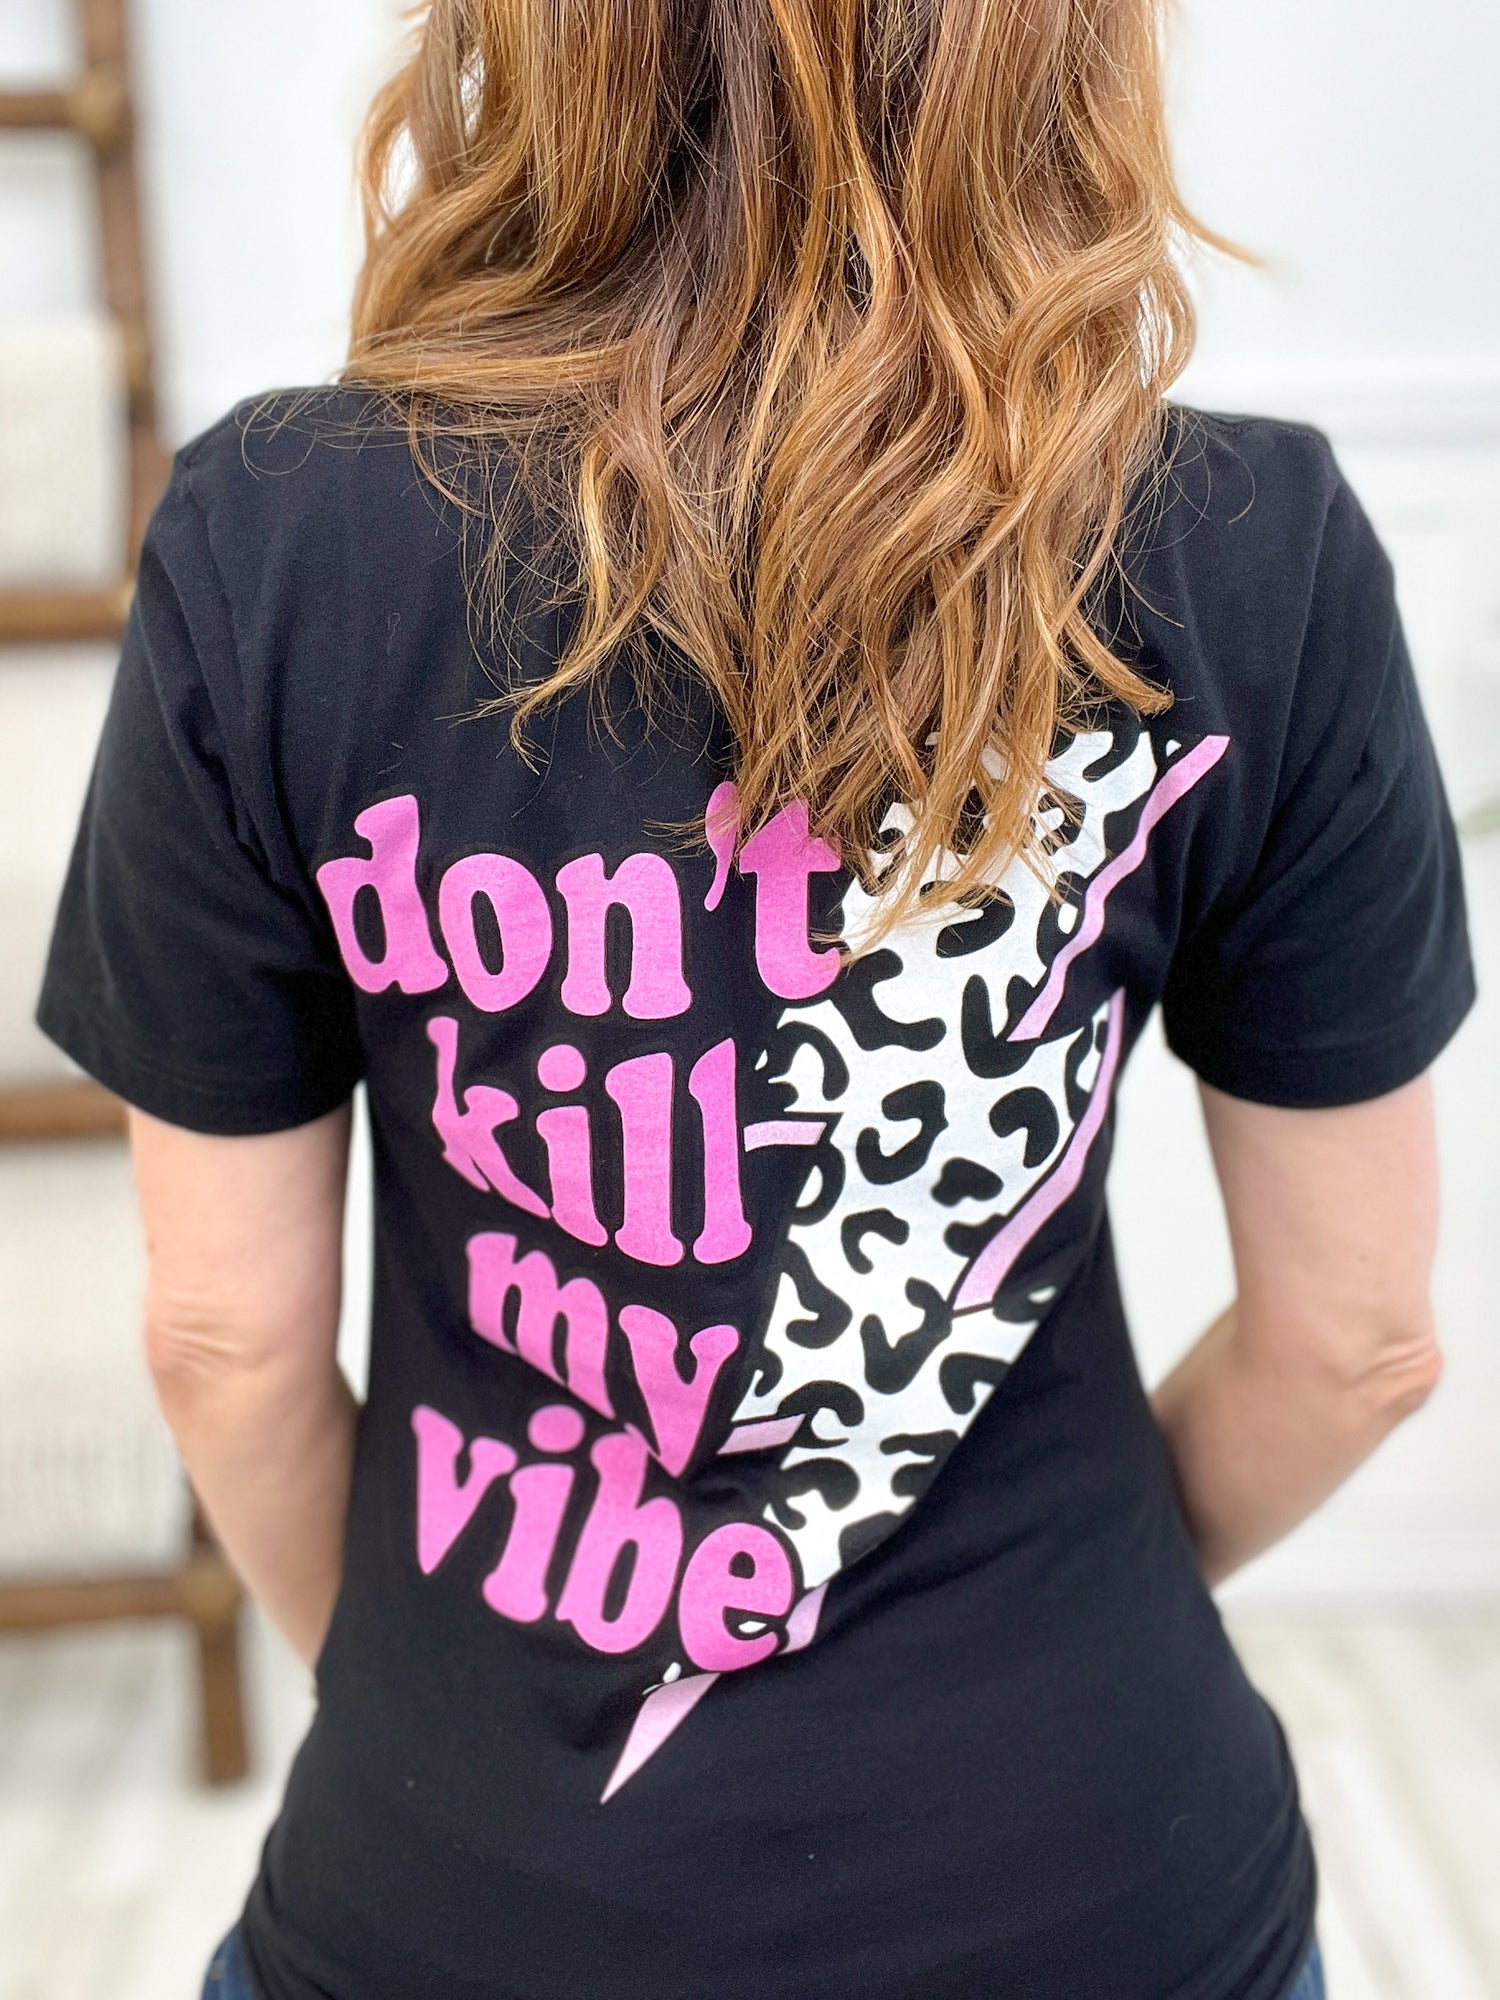 Don't Kill My Vibe Graphic Tee - IN STOCK